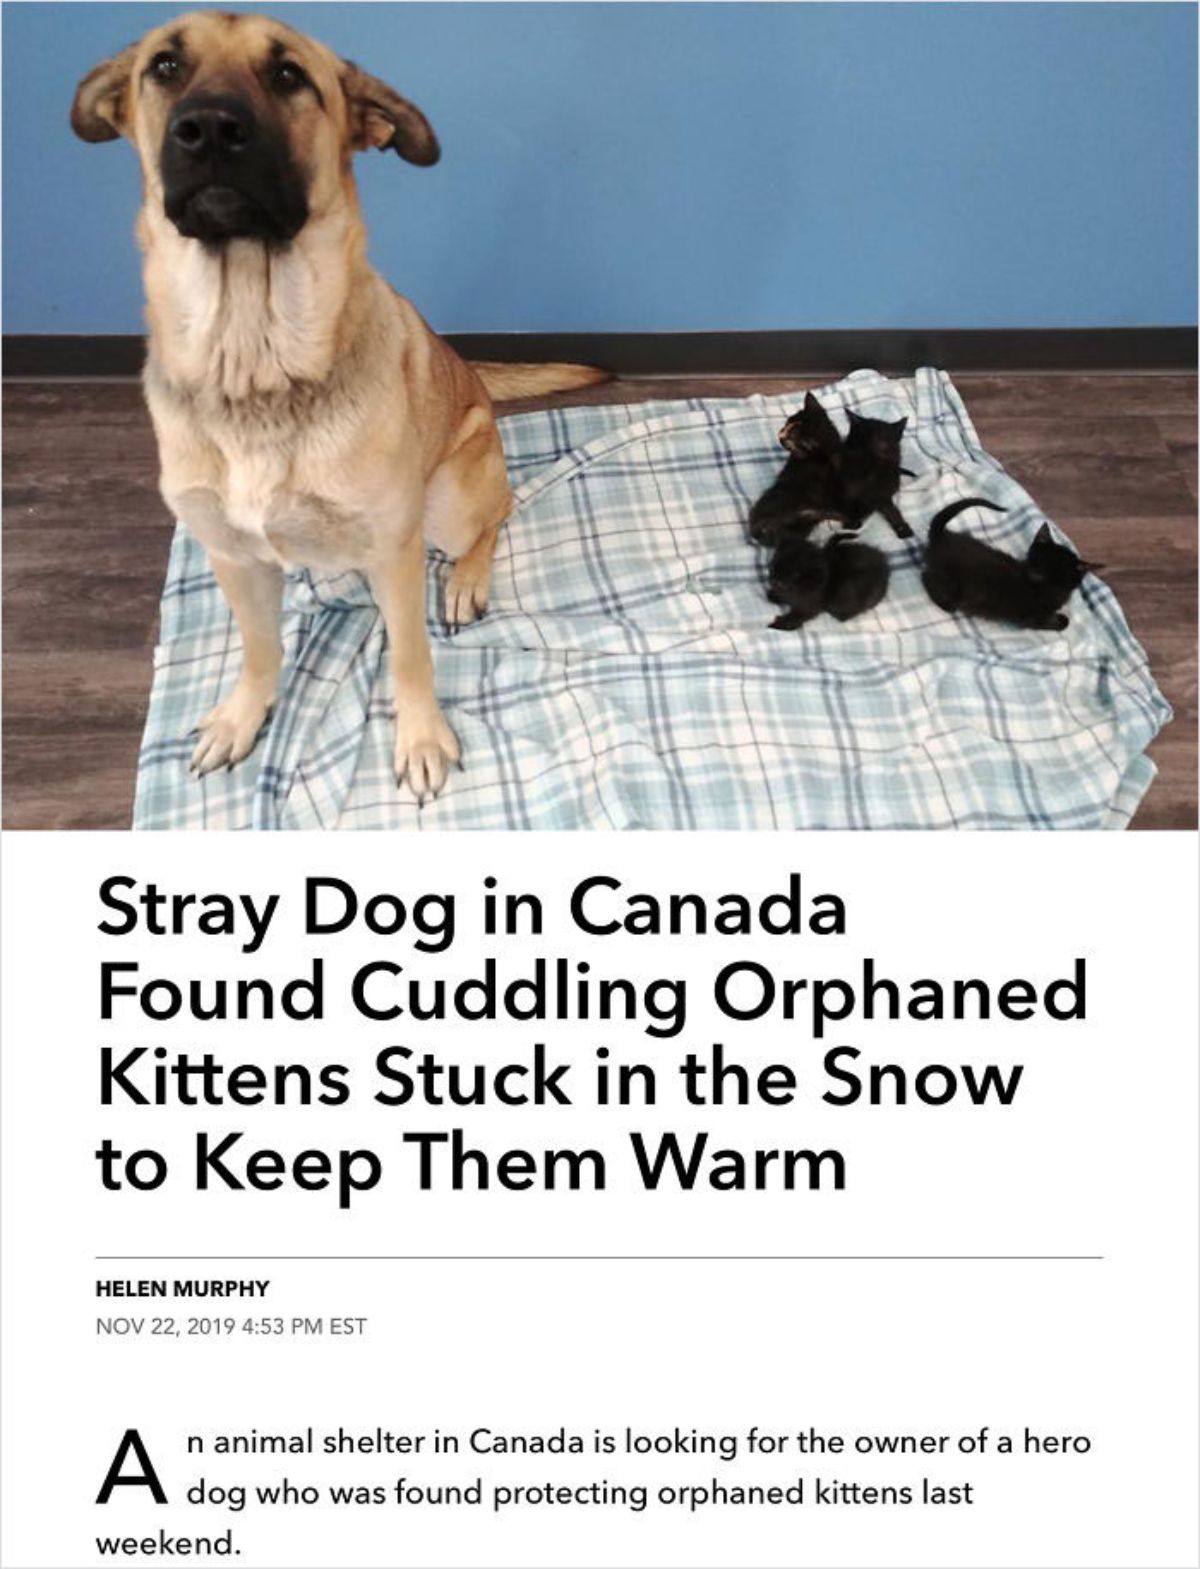 brown dog on a blue and white blanket next to 4 black kittens with a newspaper article saying the stray dog was keeping them warm in the snow